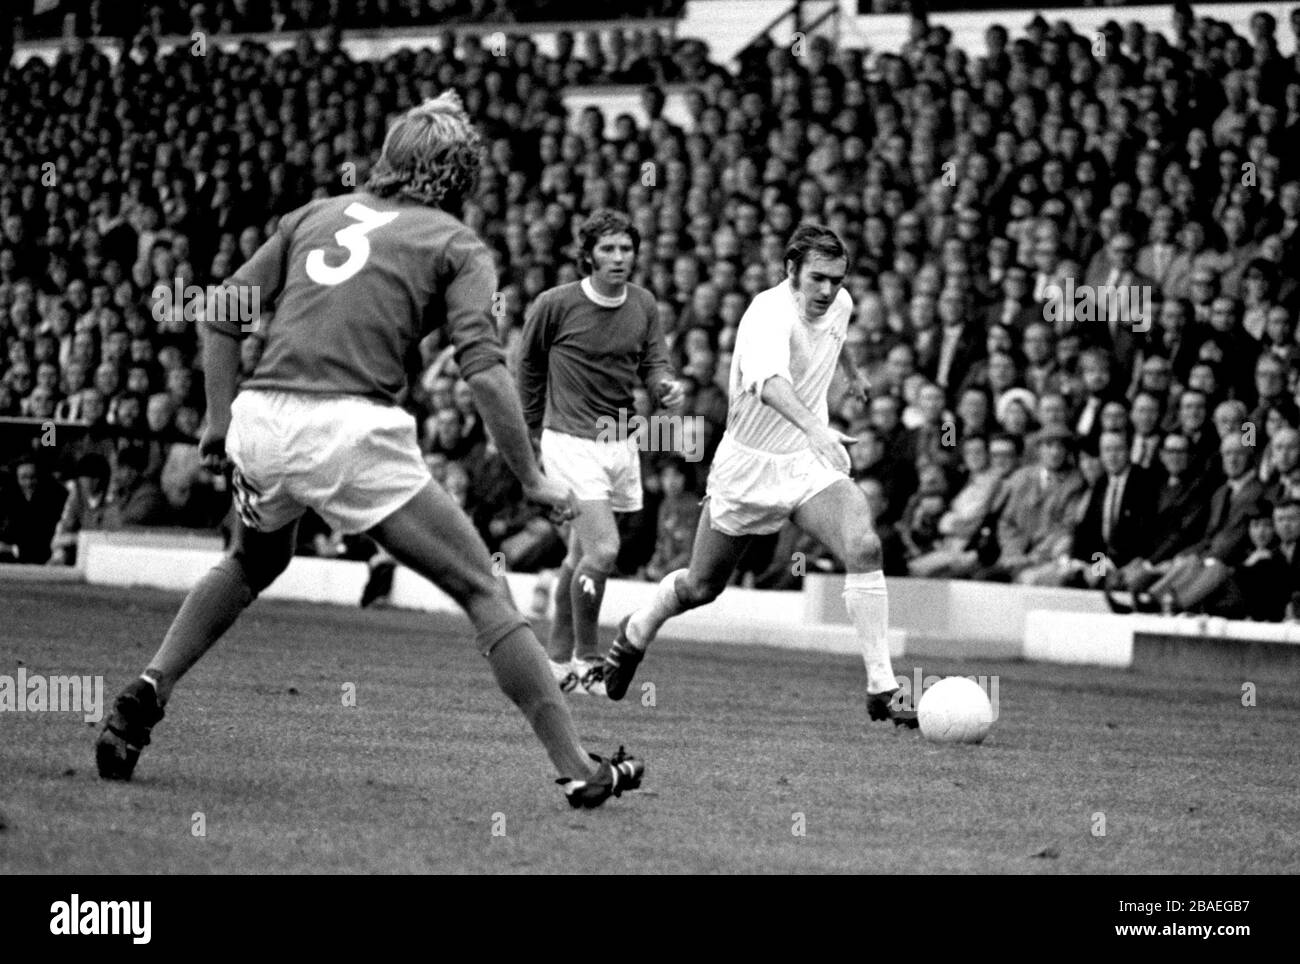 Everton's Keith Newton (l) waits to challenge Leeds United's Terry Cooper (r), watched by teammate Alan Ball (c) Stock Photo